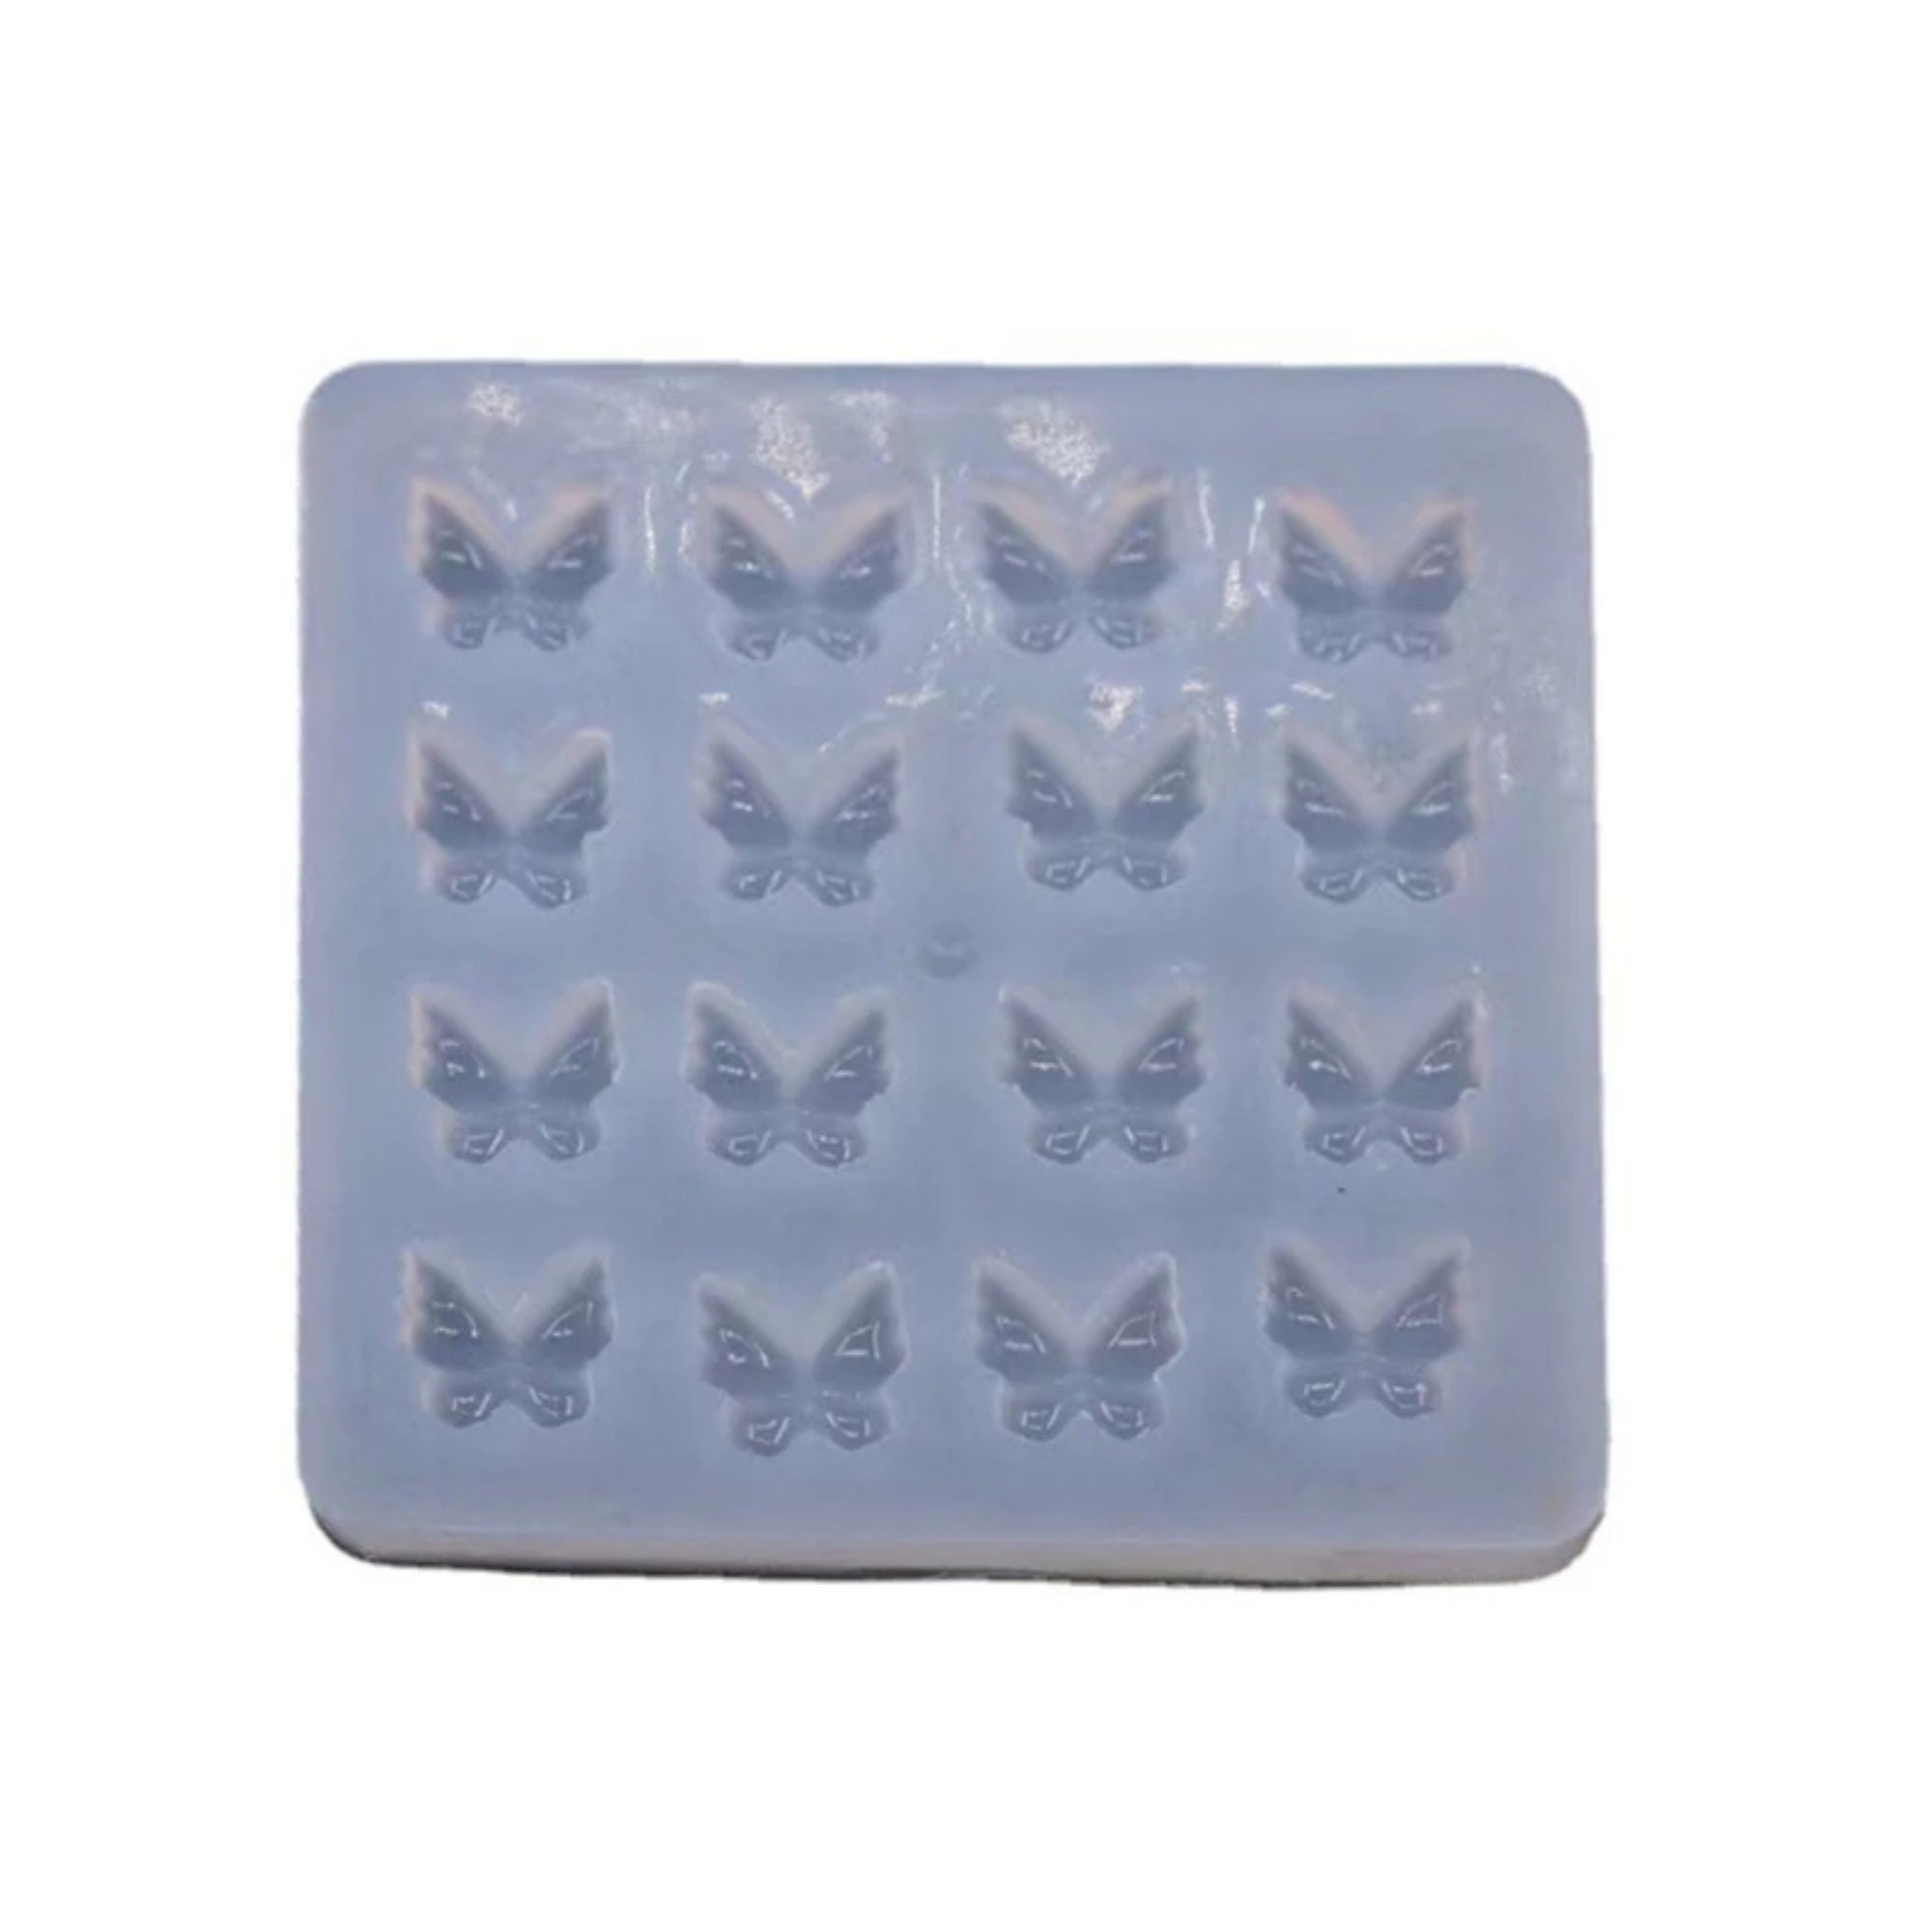 Handmade Small Butterfly Silicone Mould, Wax Melt Resin Ice Baking Mold 